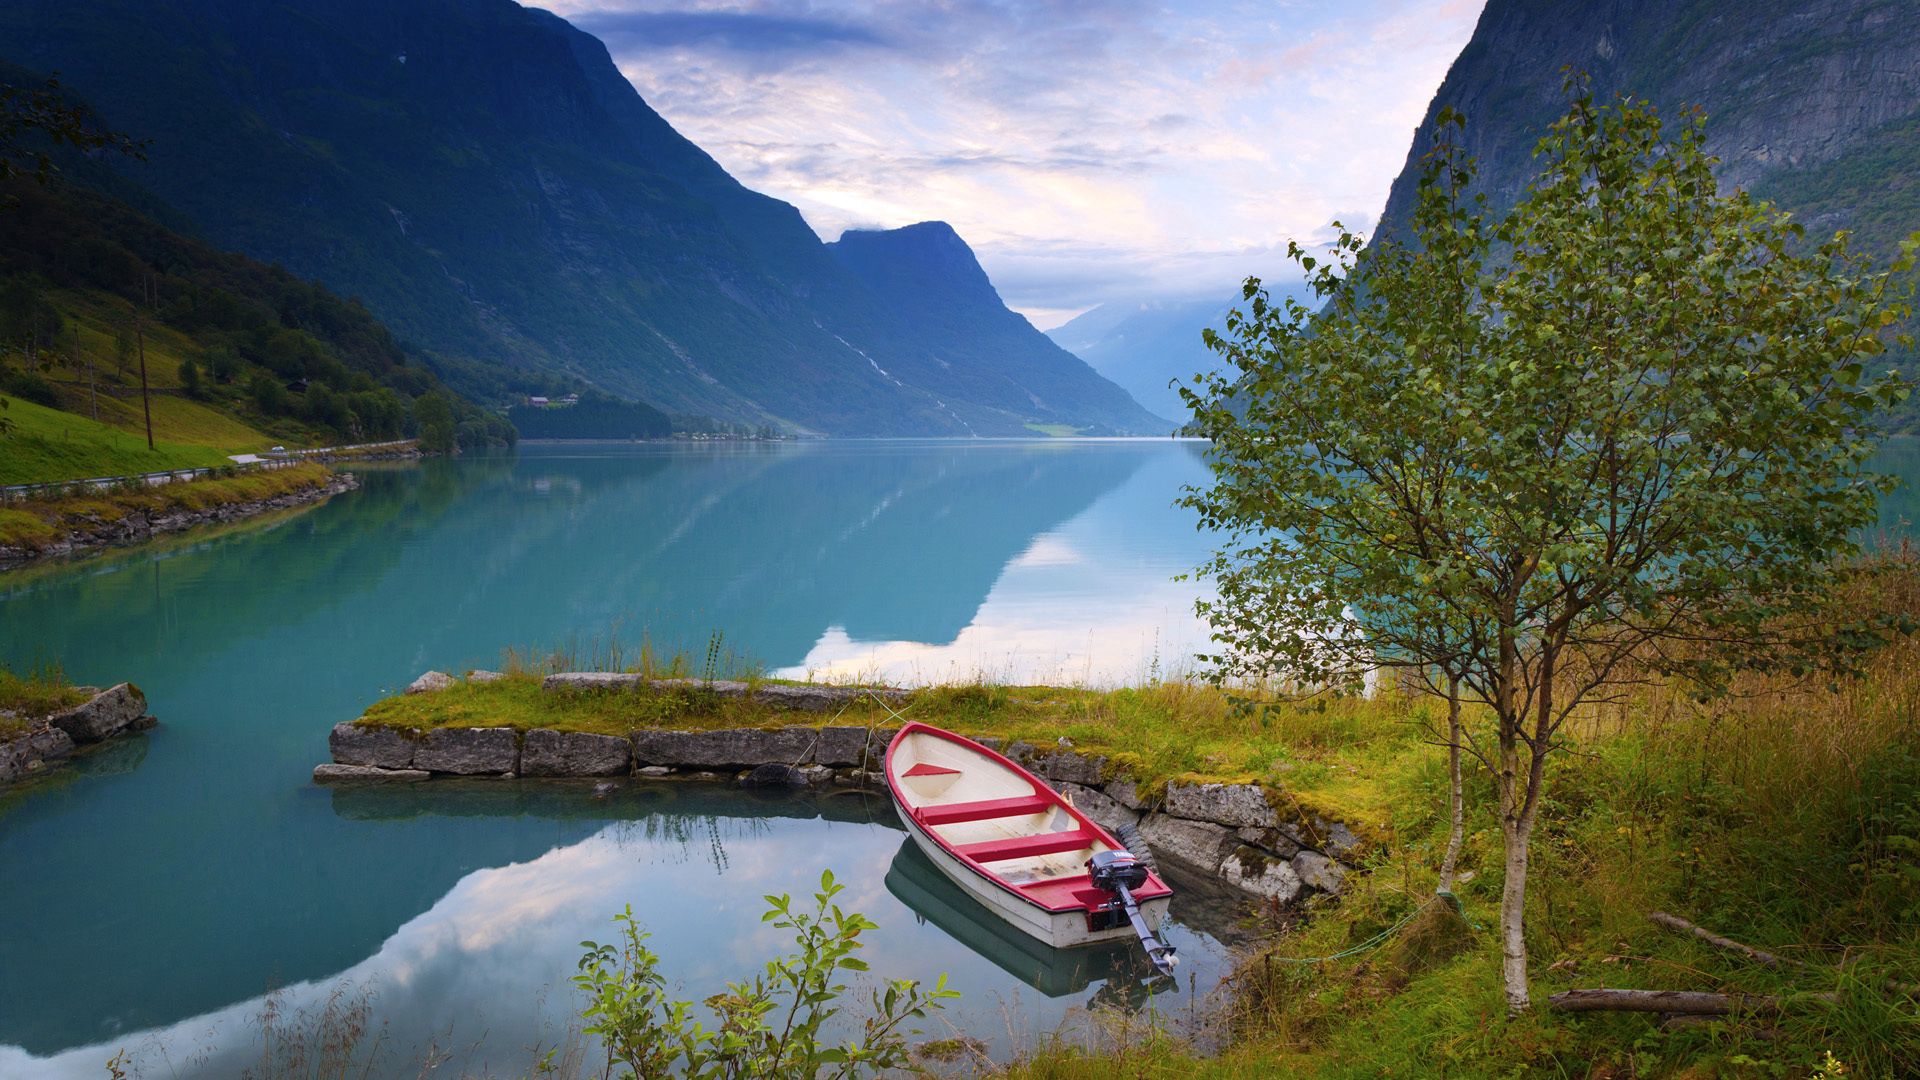 lake, blue water, norway, boat, nature, grass, stones, mountains, shore, bank lock screen backgrounds